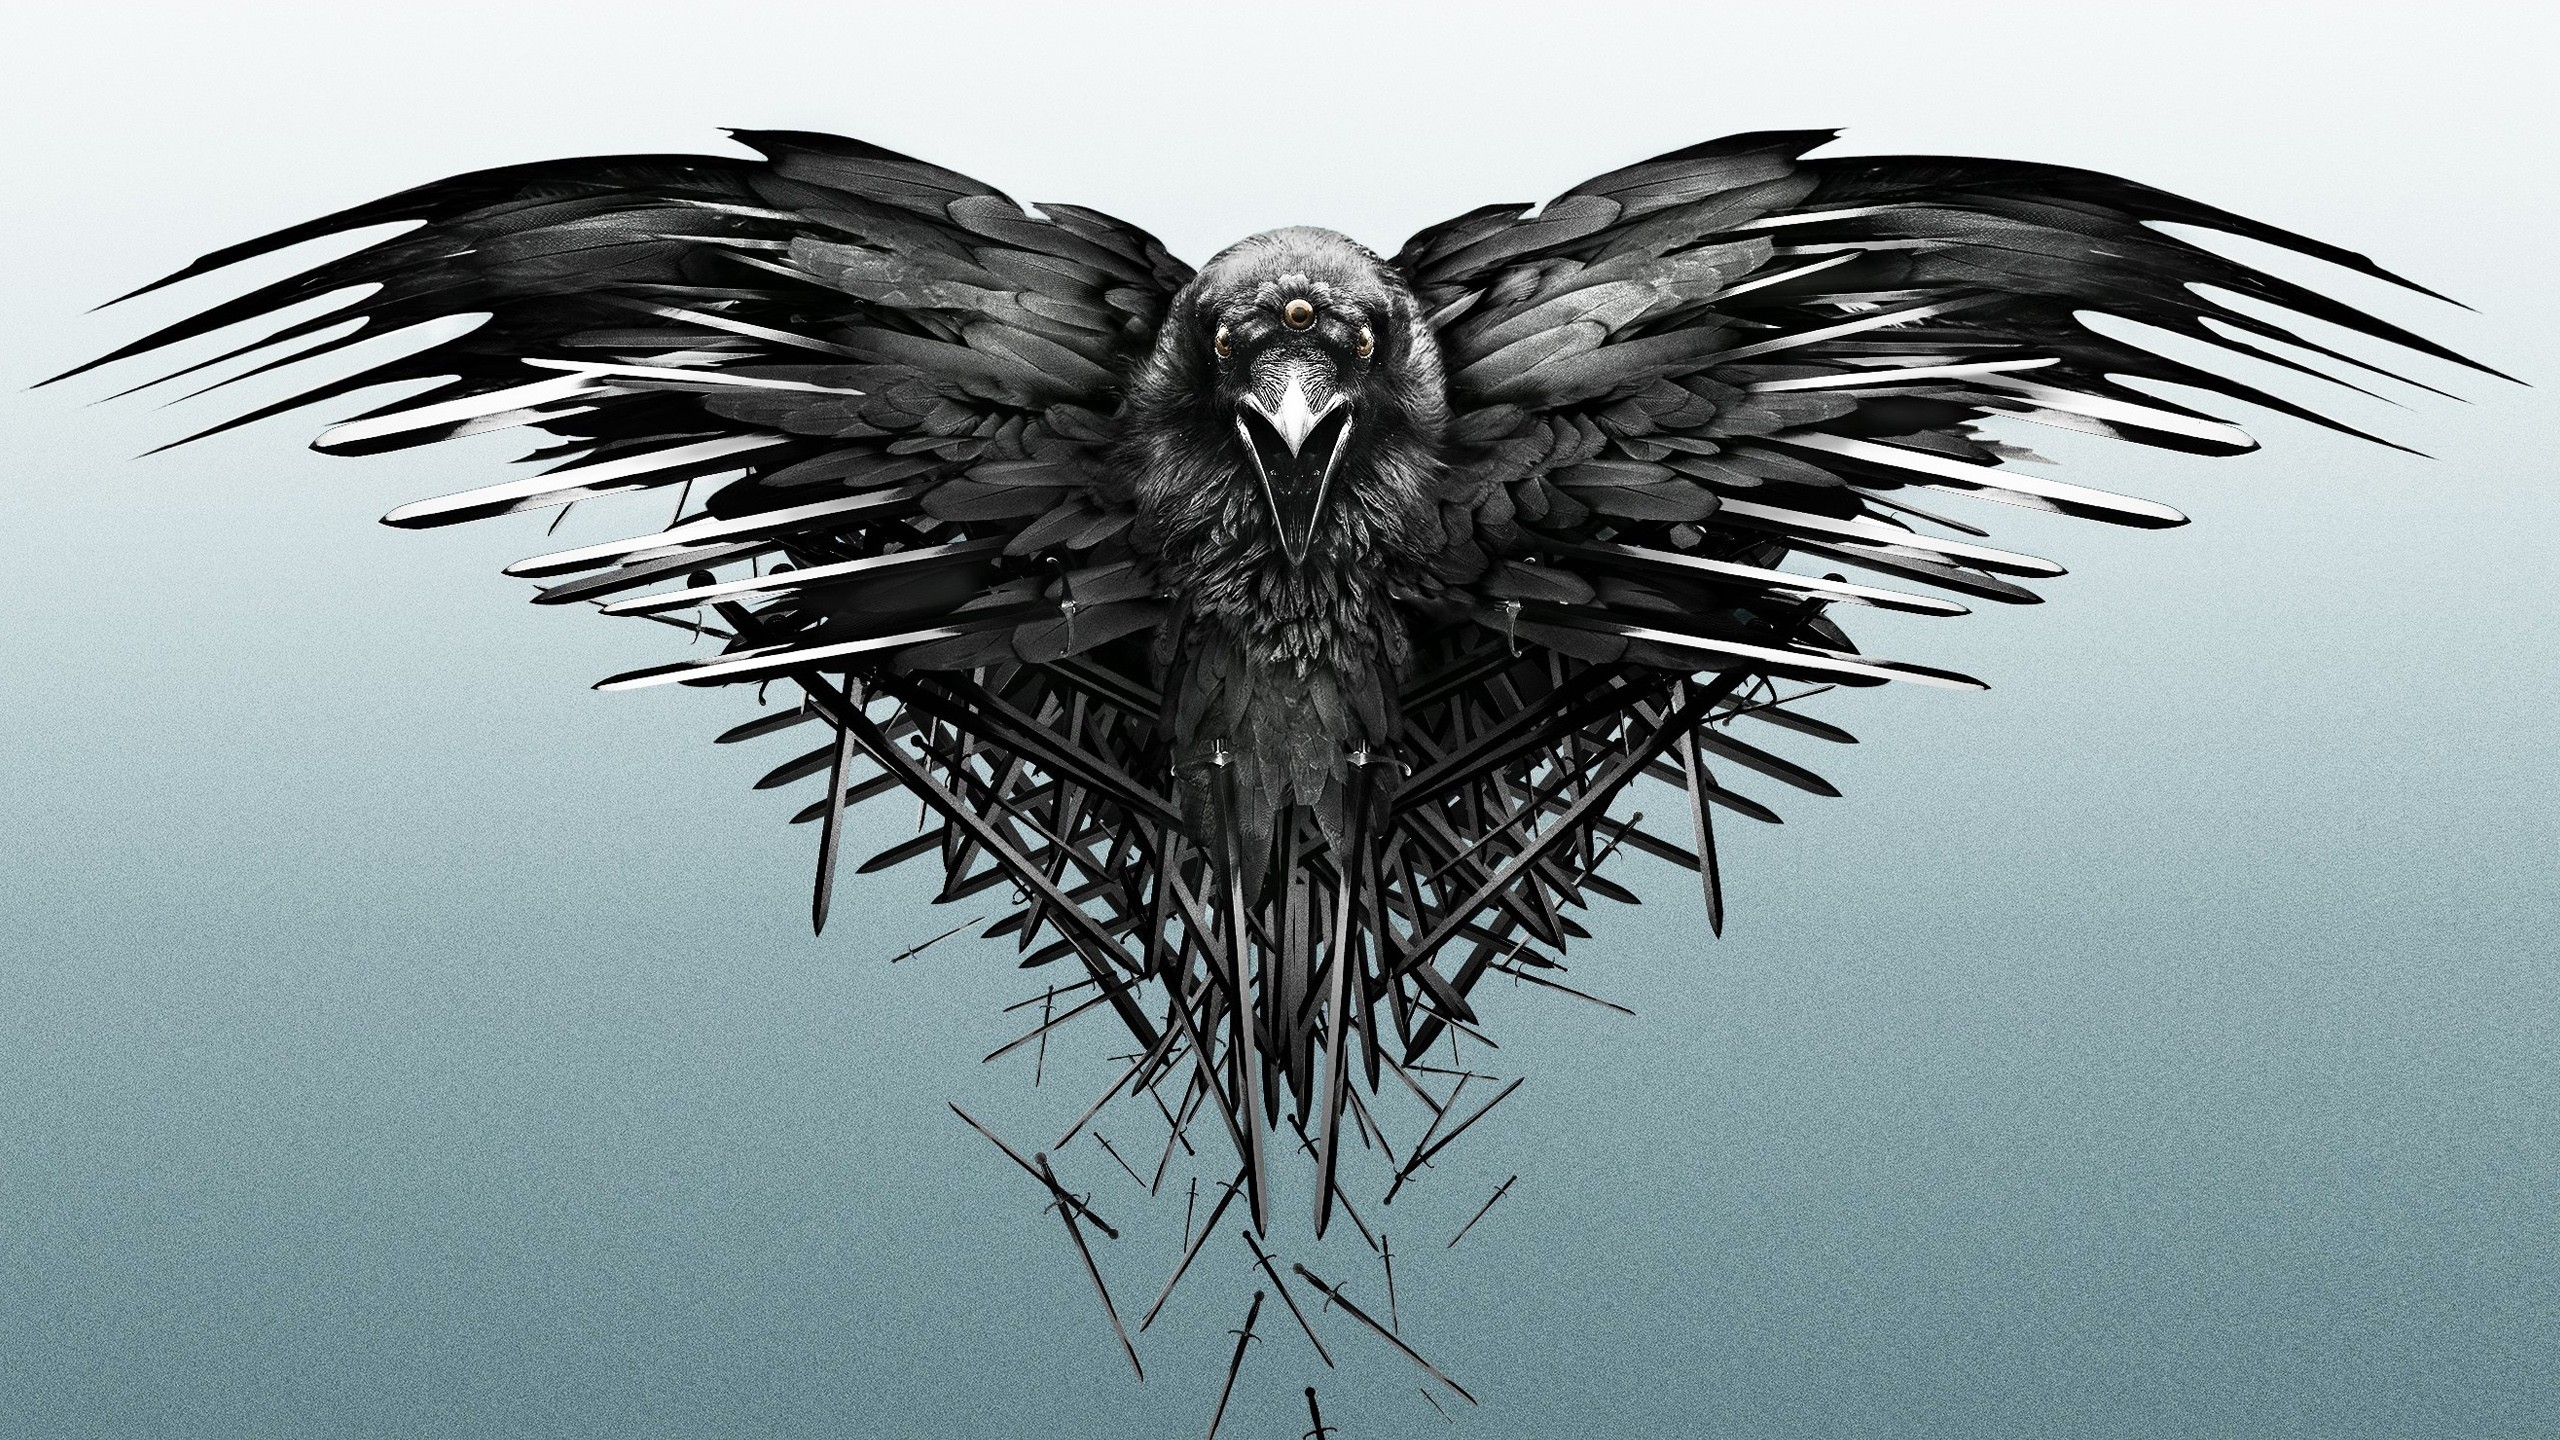 General 2560x1440 simple background Game of Thrones Three eyed crows artwork